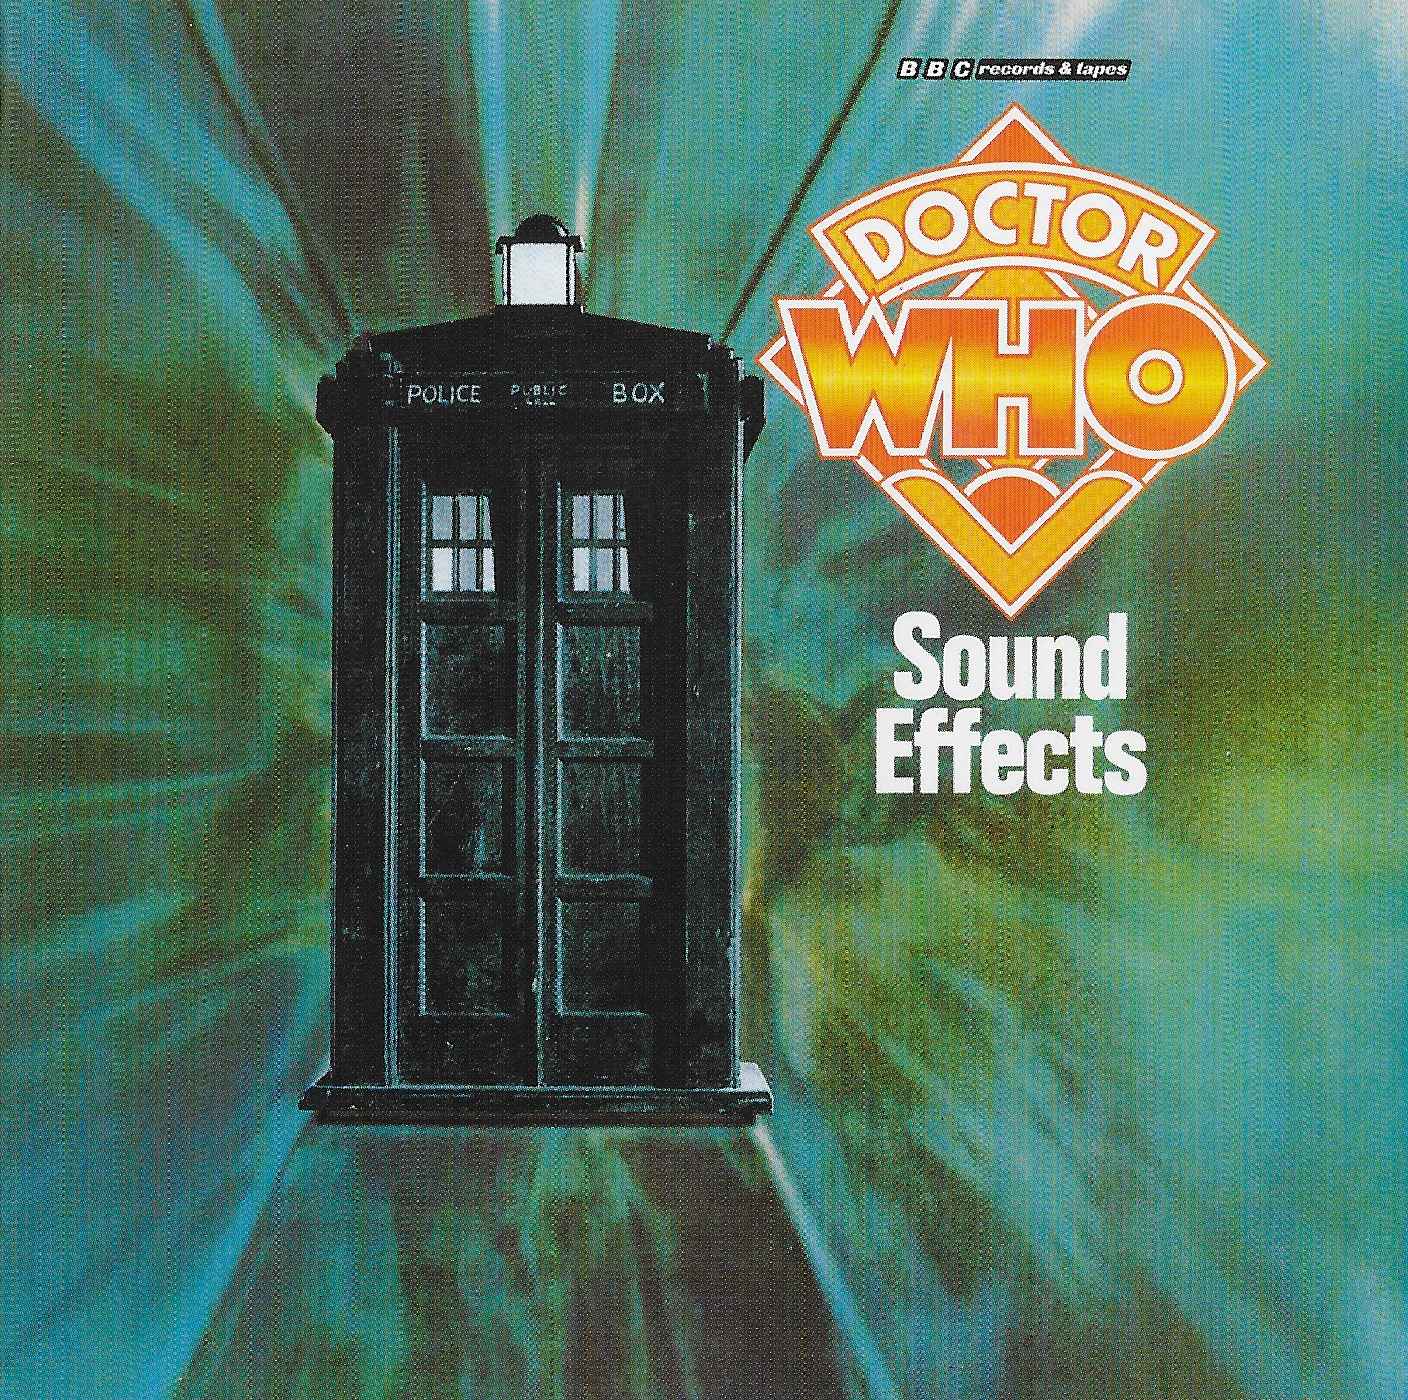 Picture of ISBN 978-1-4084-7055-8 Doctor Who sound effects by artist BBC radiophonic workshop from the BBC records and Tapes library